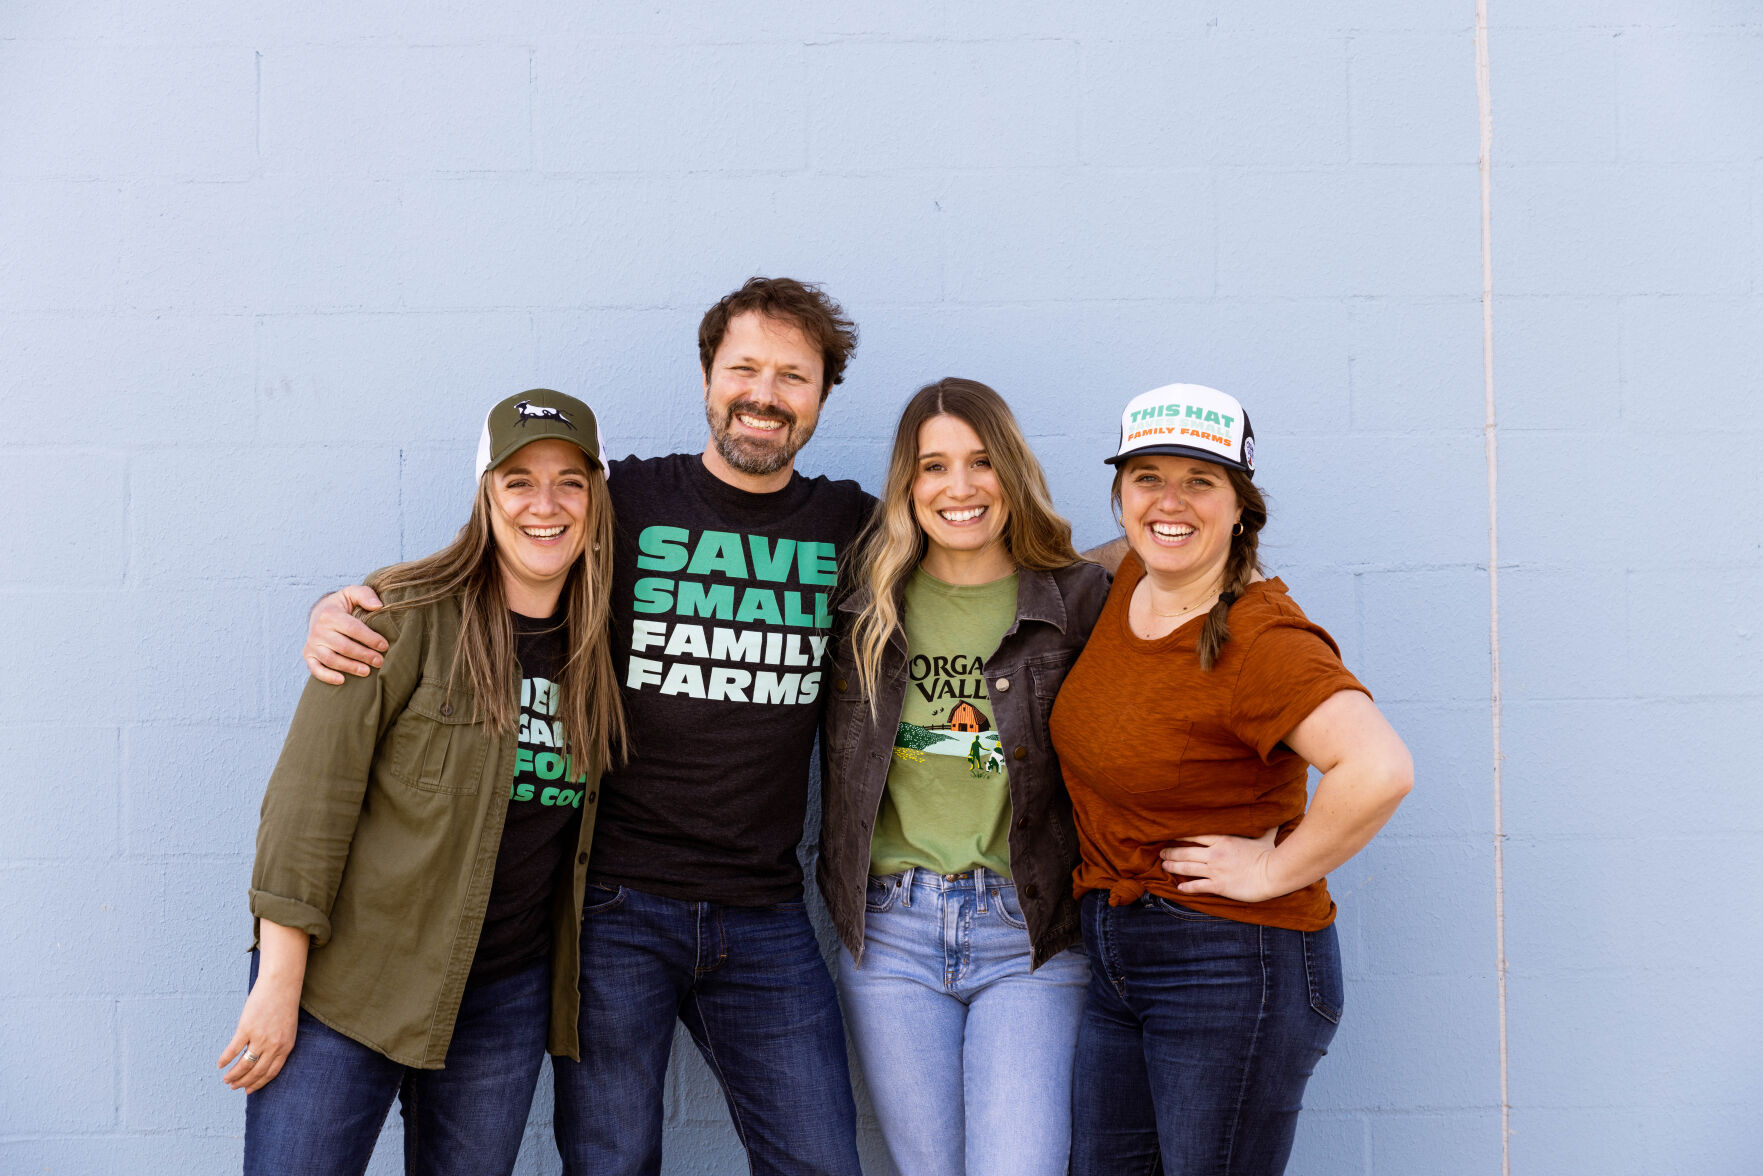 Organic Valley lstore to support family farms